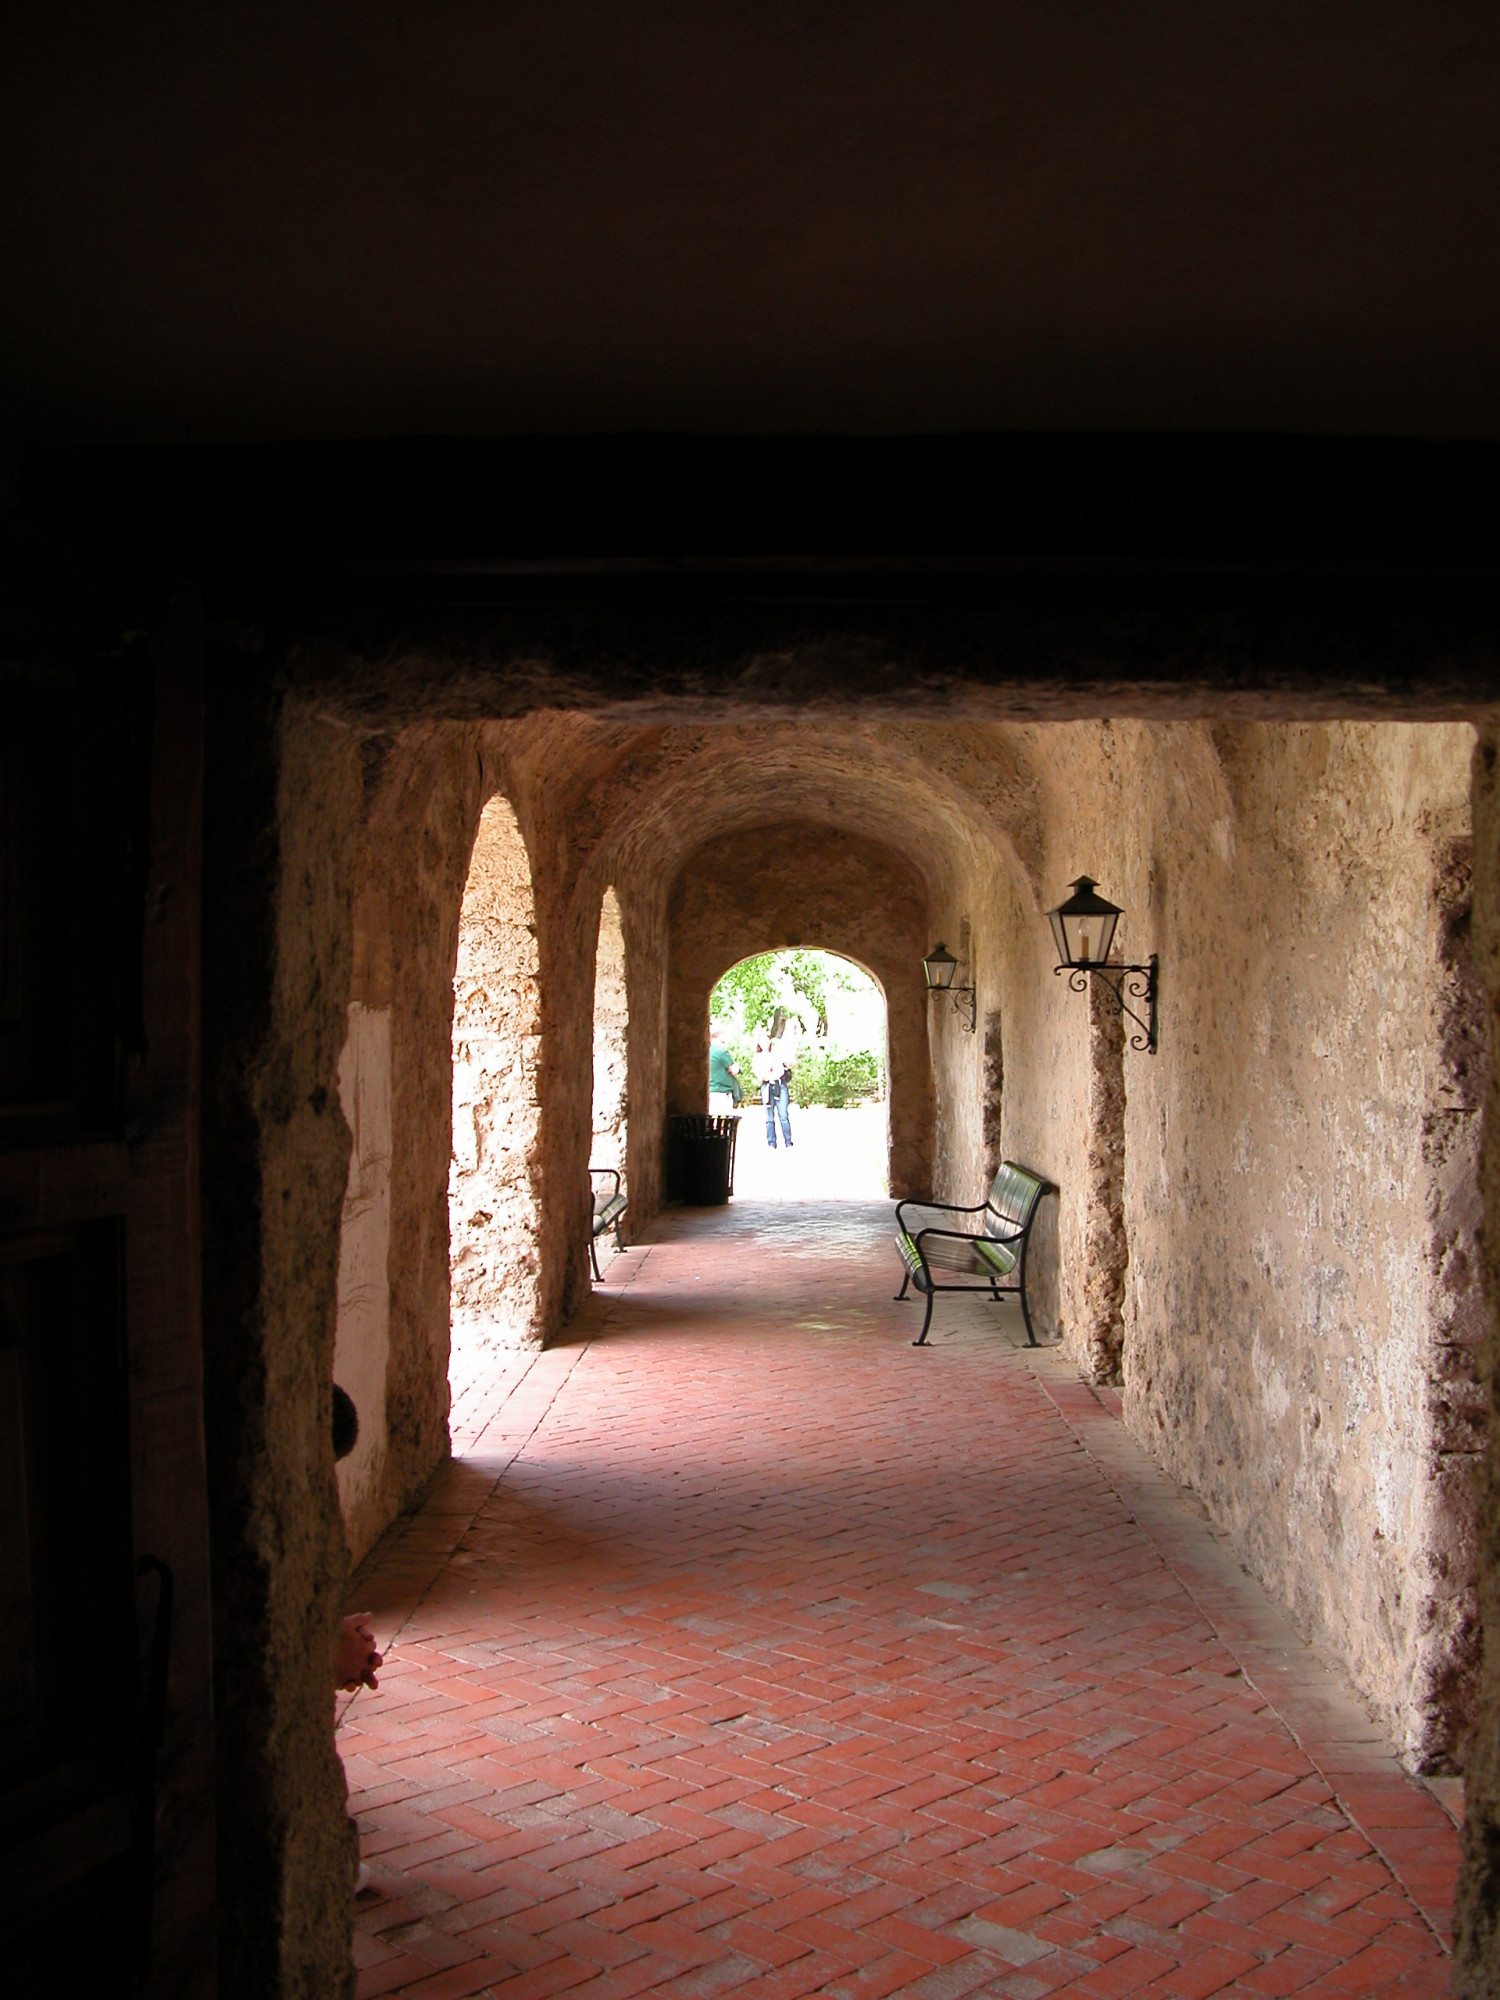 Arched walkway at Mission Concepción
                                                
                                                    [Sequence #]: 1 of 1
                                                